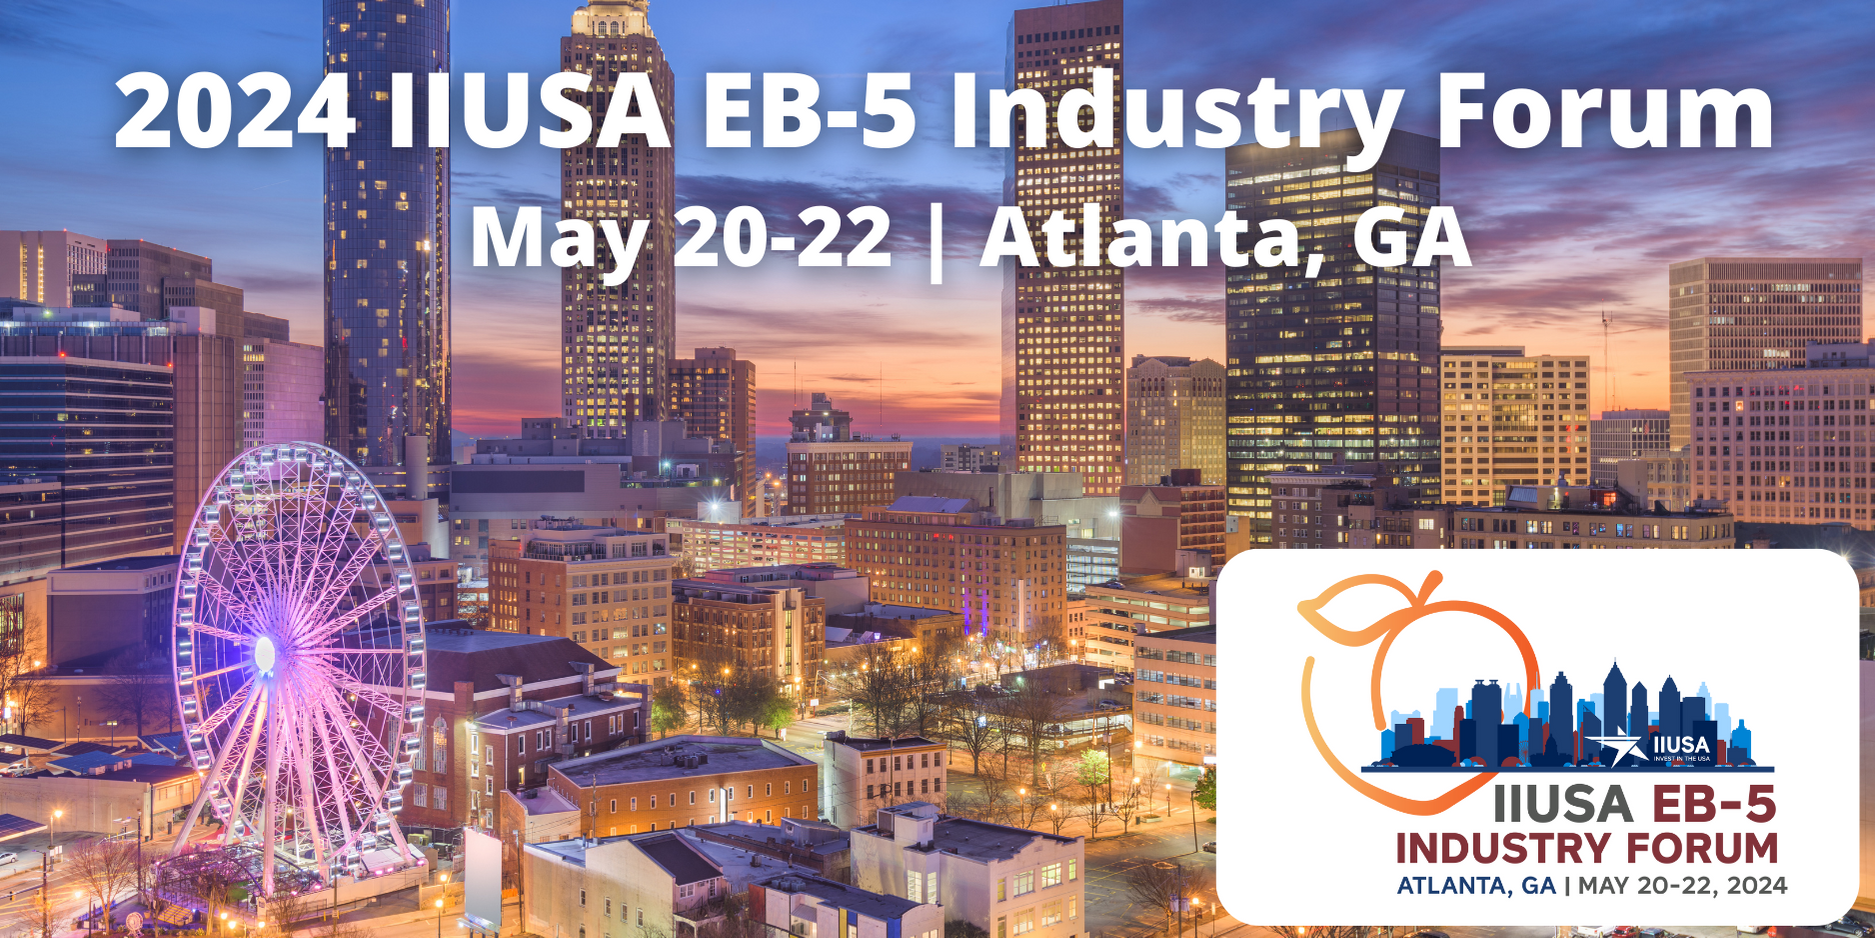 Unlock Your EB-5 Opportunities: Join IIUSA and Attend the Industry Forum & New Member Welcome Social for Free!